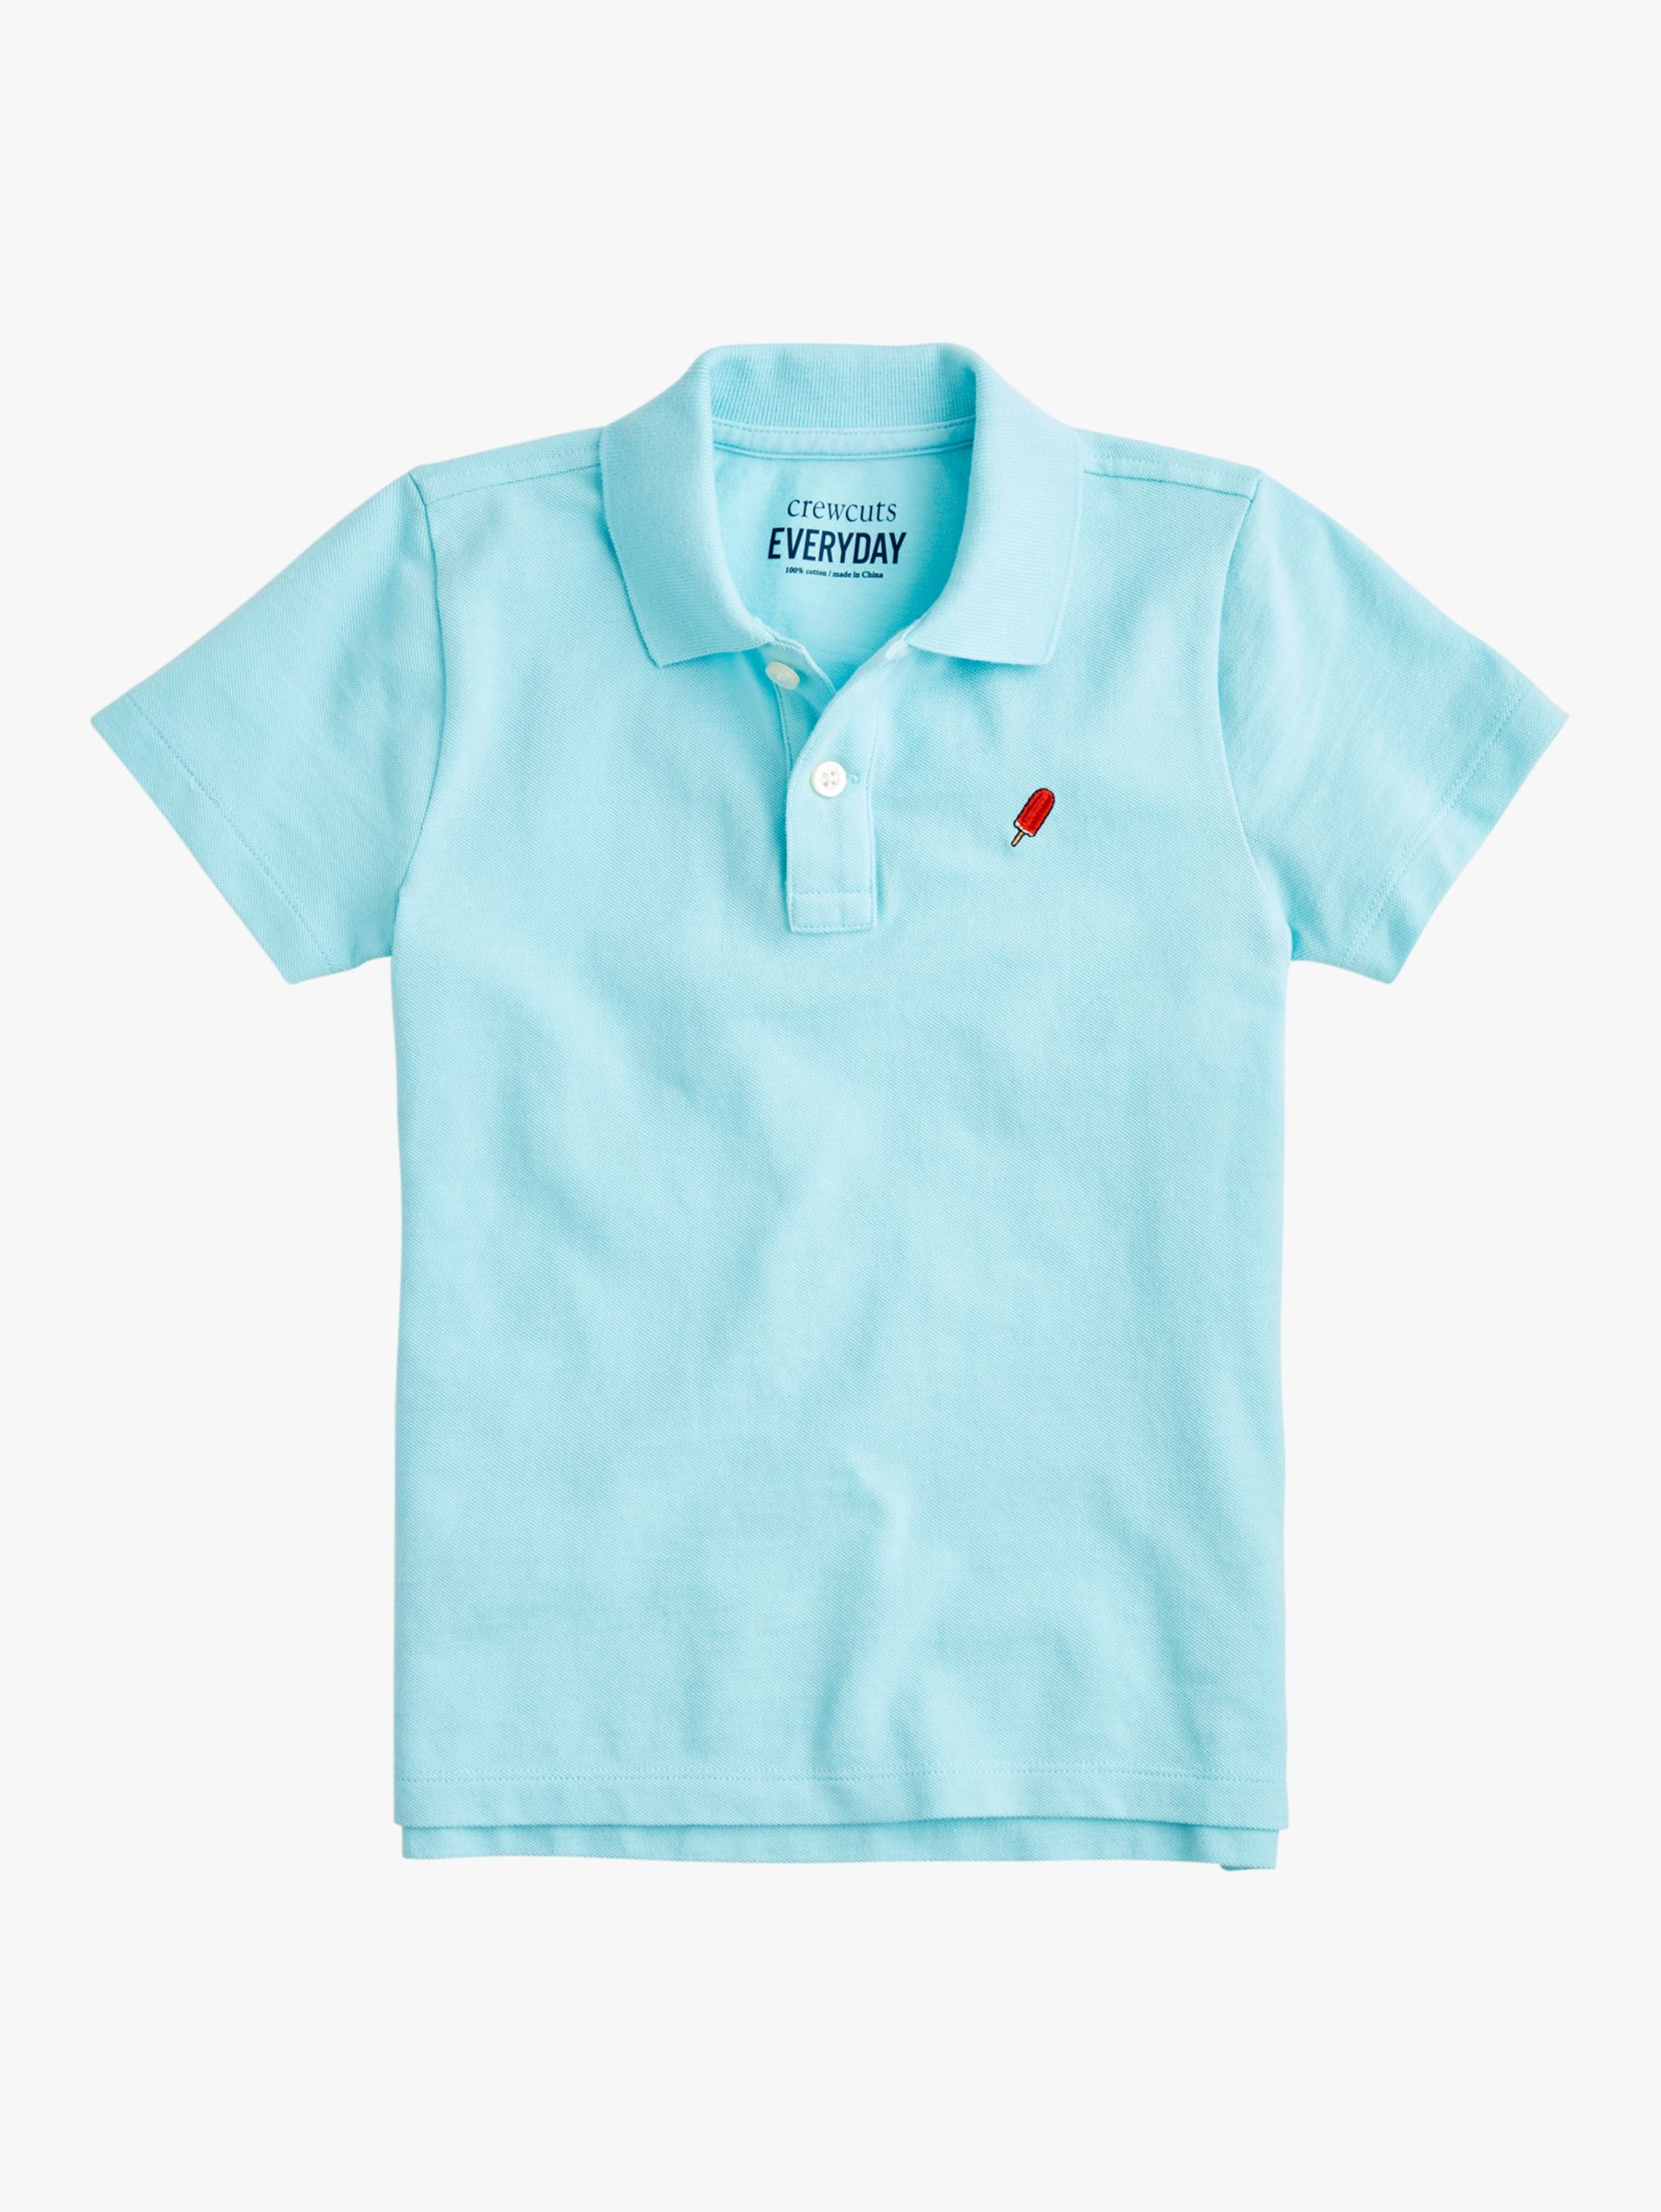 crewcuts by J.Crew Boys' Critter Pique Polo Shirt at John Lewis & Partners